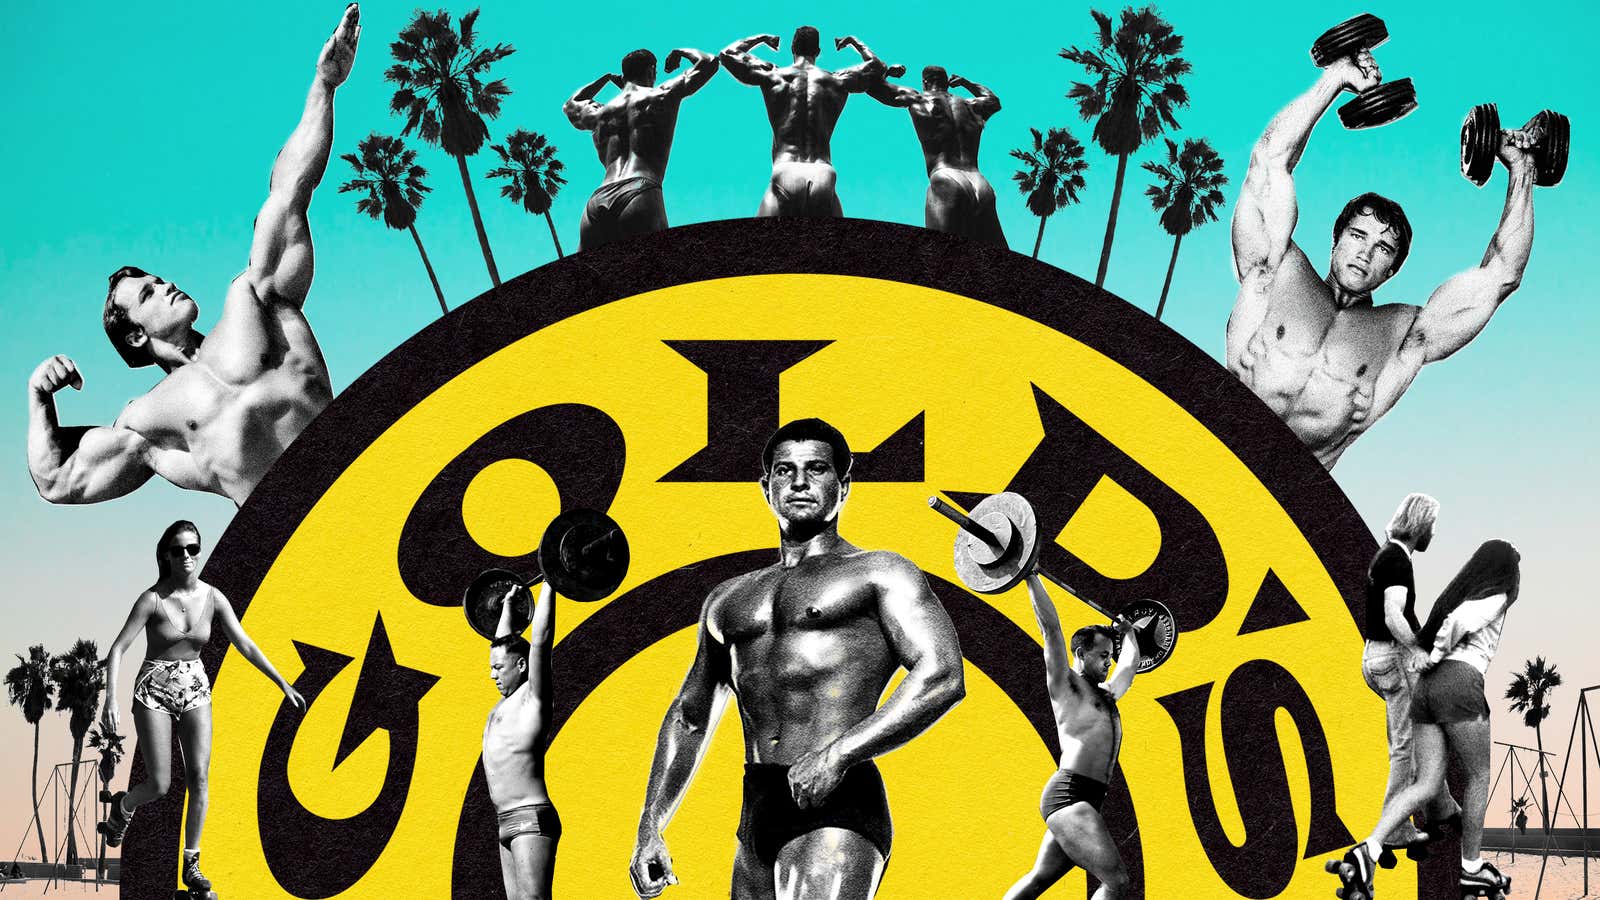 The Oral History of Gold's Gym, Where Arnold Schwarzenegger Became A Star